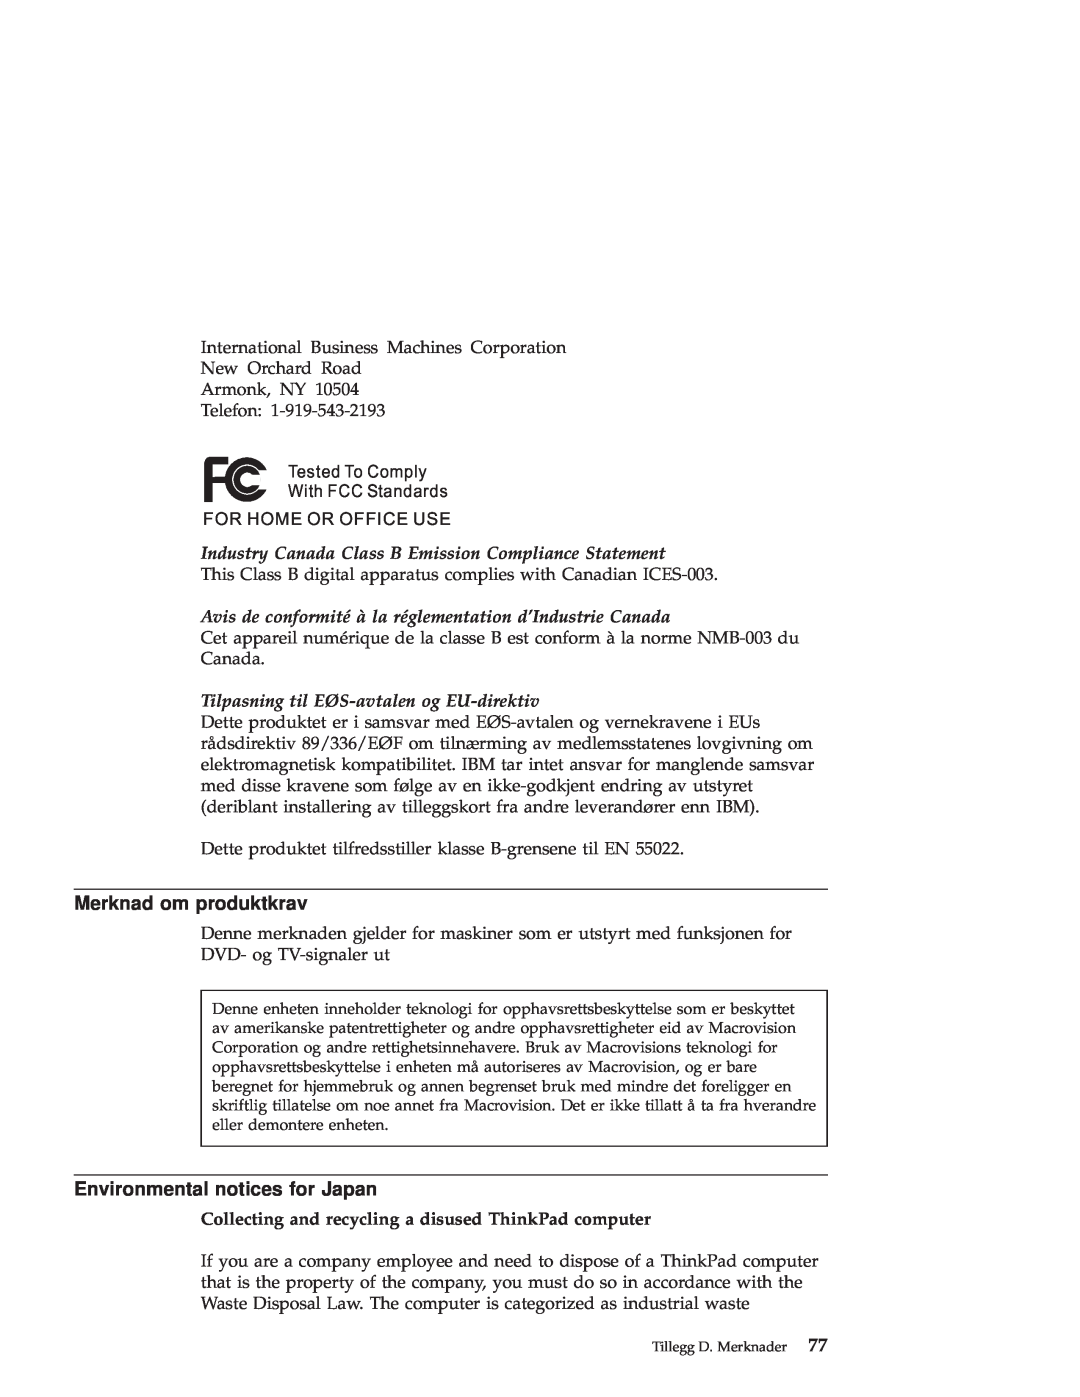 IBM R50 manual Merknad om produktkrav, Environmental notices for Japan, Tested To Comply With FCC Standards 